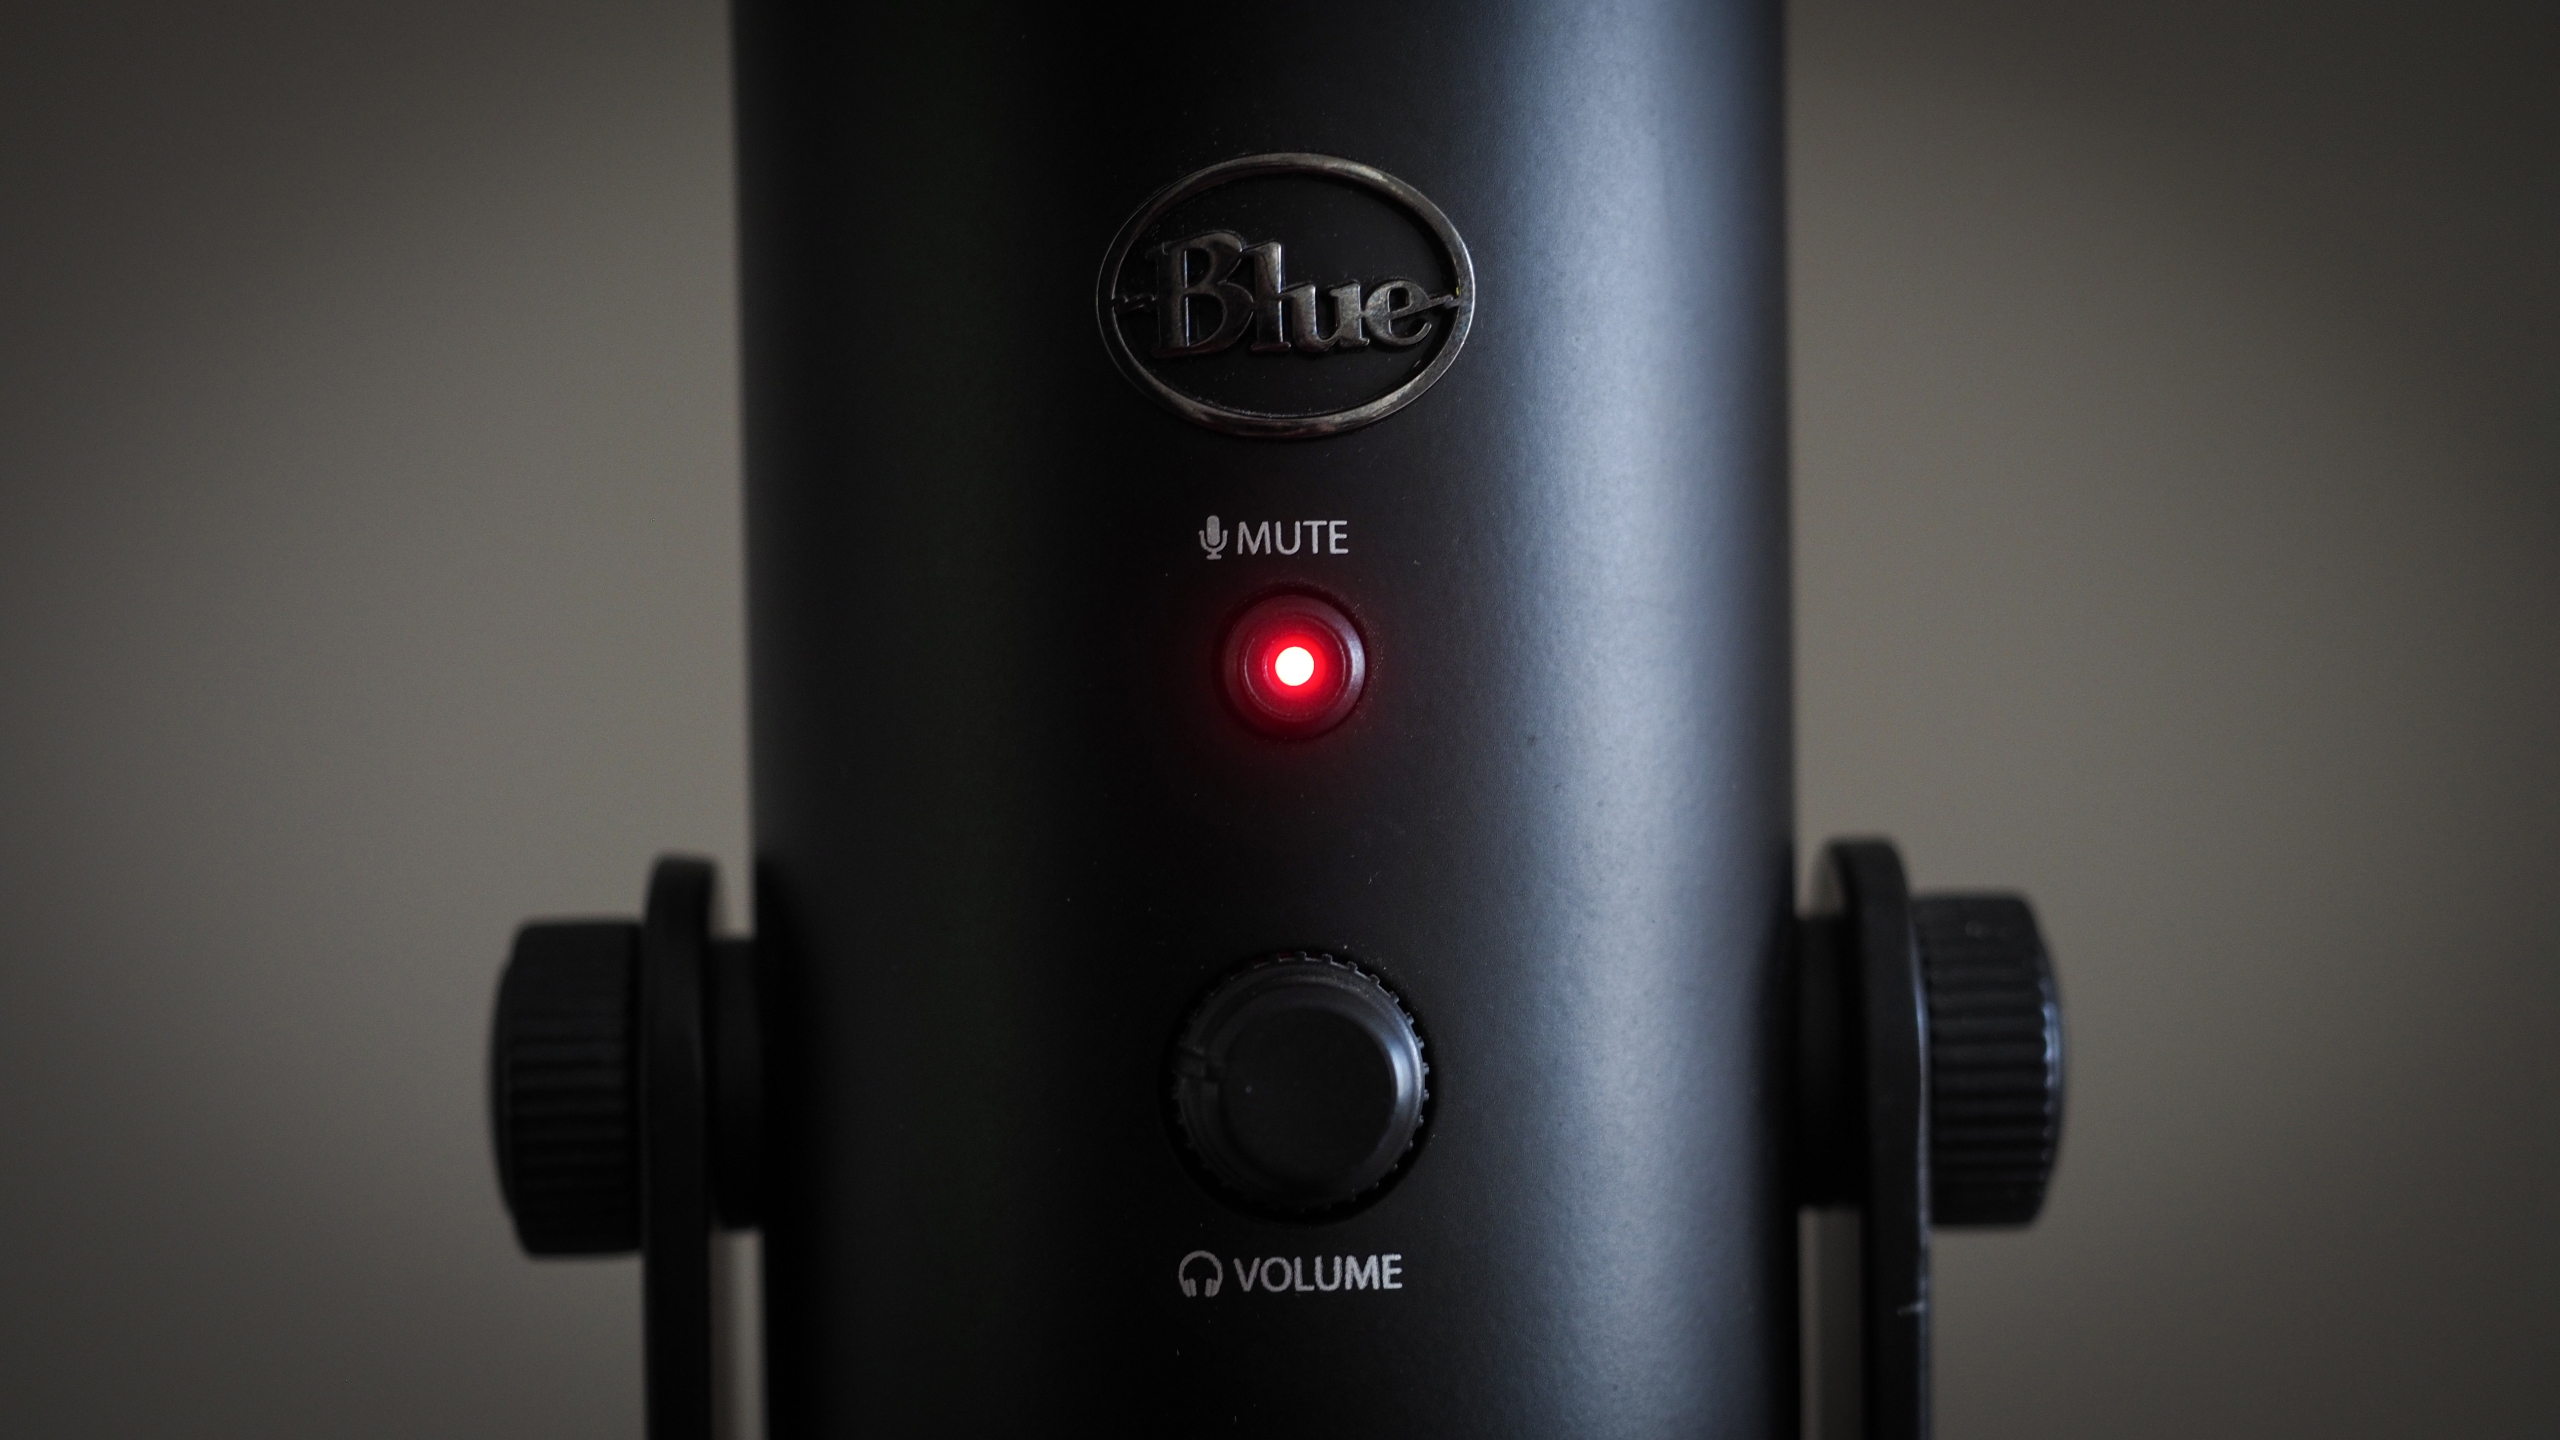 Blue Yeti review image showing a close up of the mute button, with the light on.